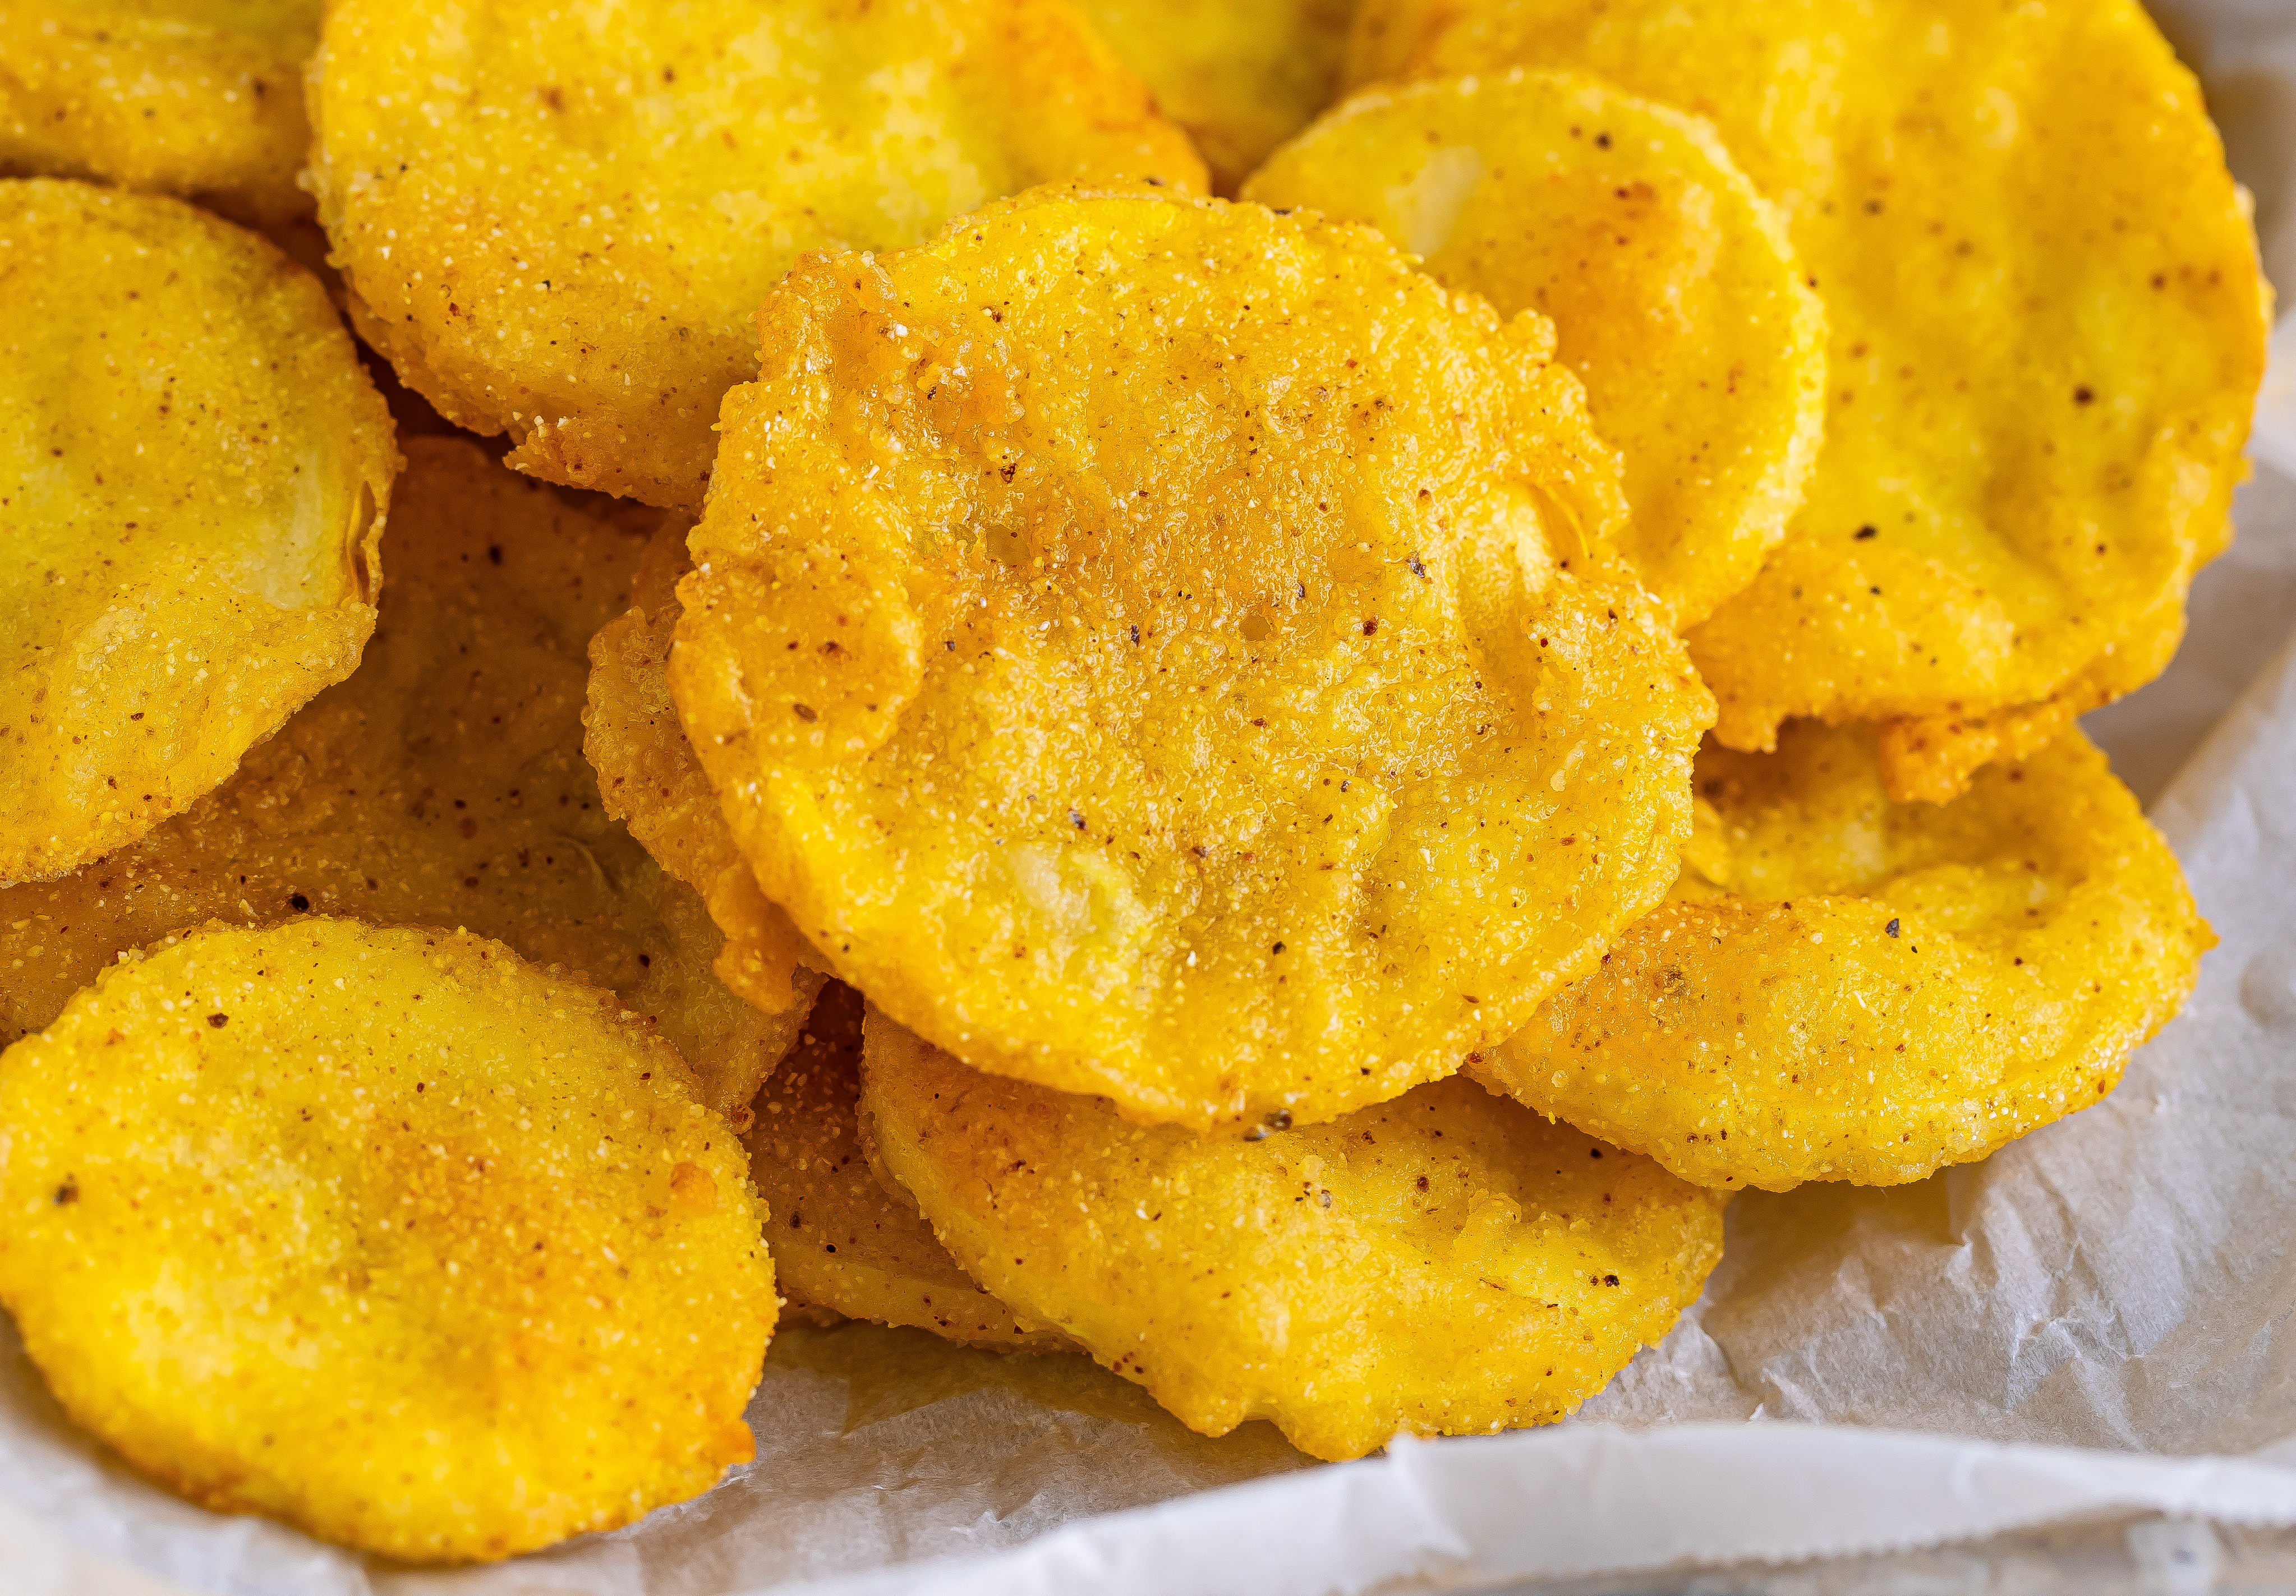 Slices of fried squash piled on a platter.